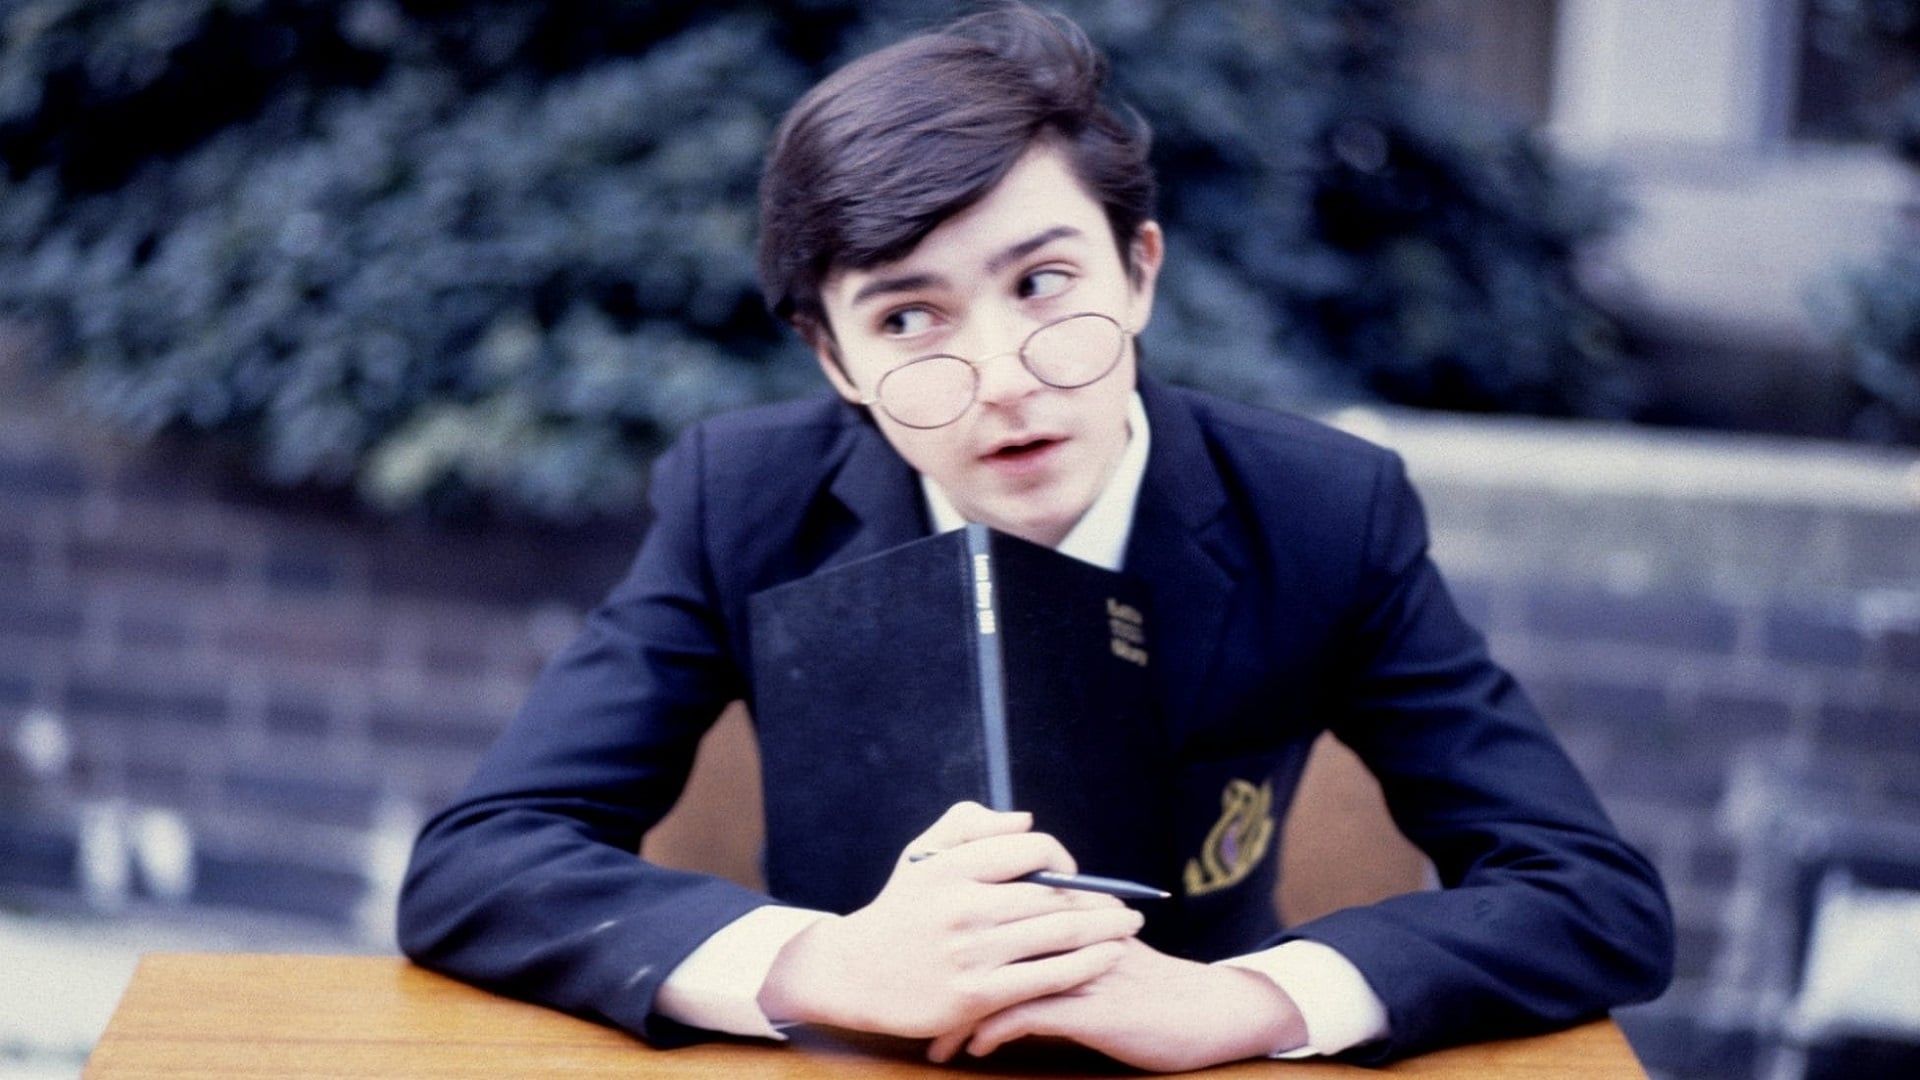 The Secret Diary of Adrian Mole Aged 13¾ background